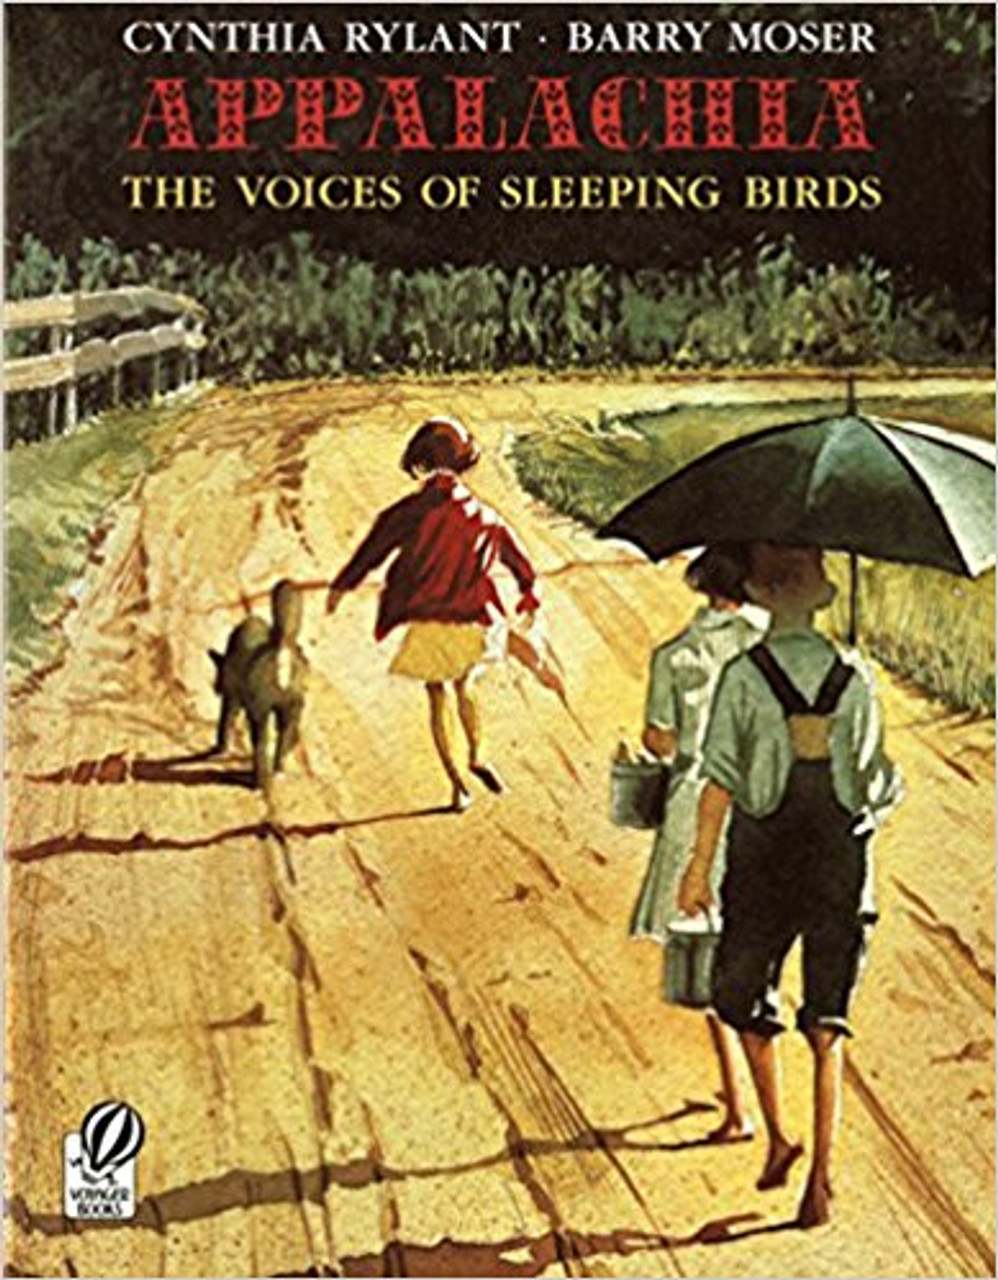 Appalachia The Voices of Sleeping Birds by Cynthia Rylant